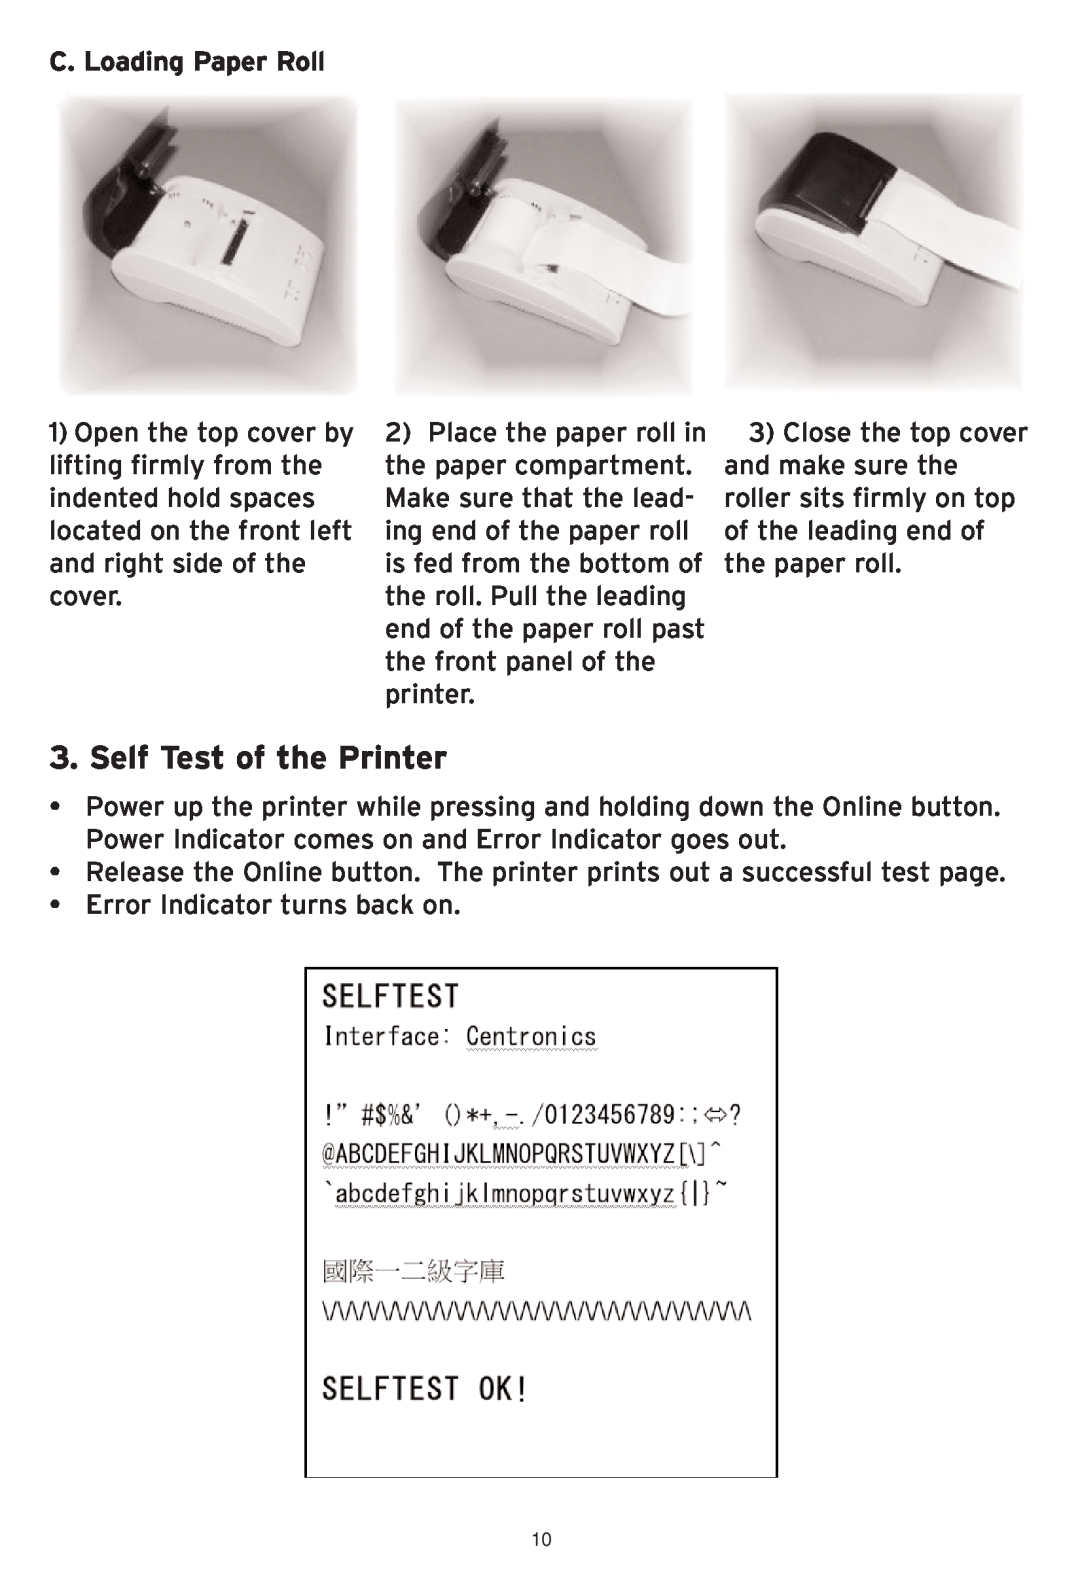 SMC Networks SMCWHS-POS manual Self Test of the Printer, C. Loading Paper Roll 